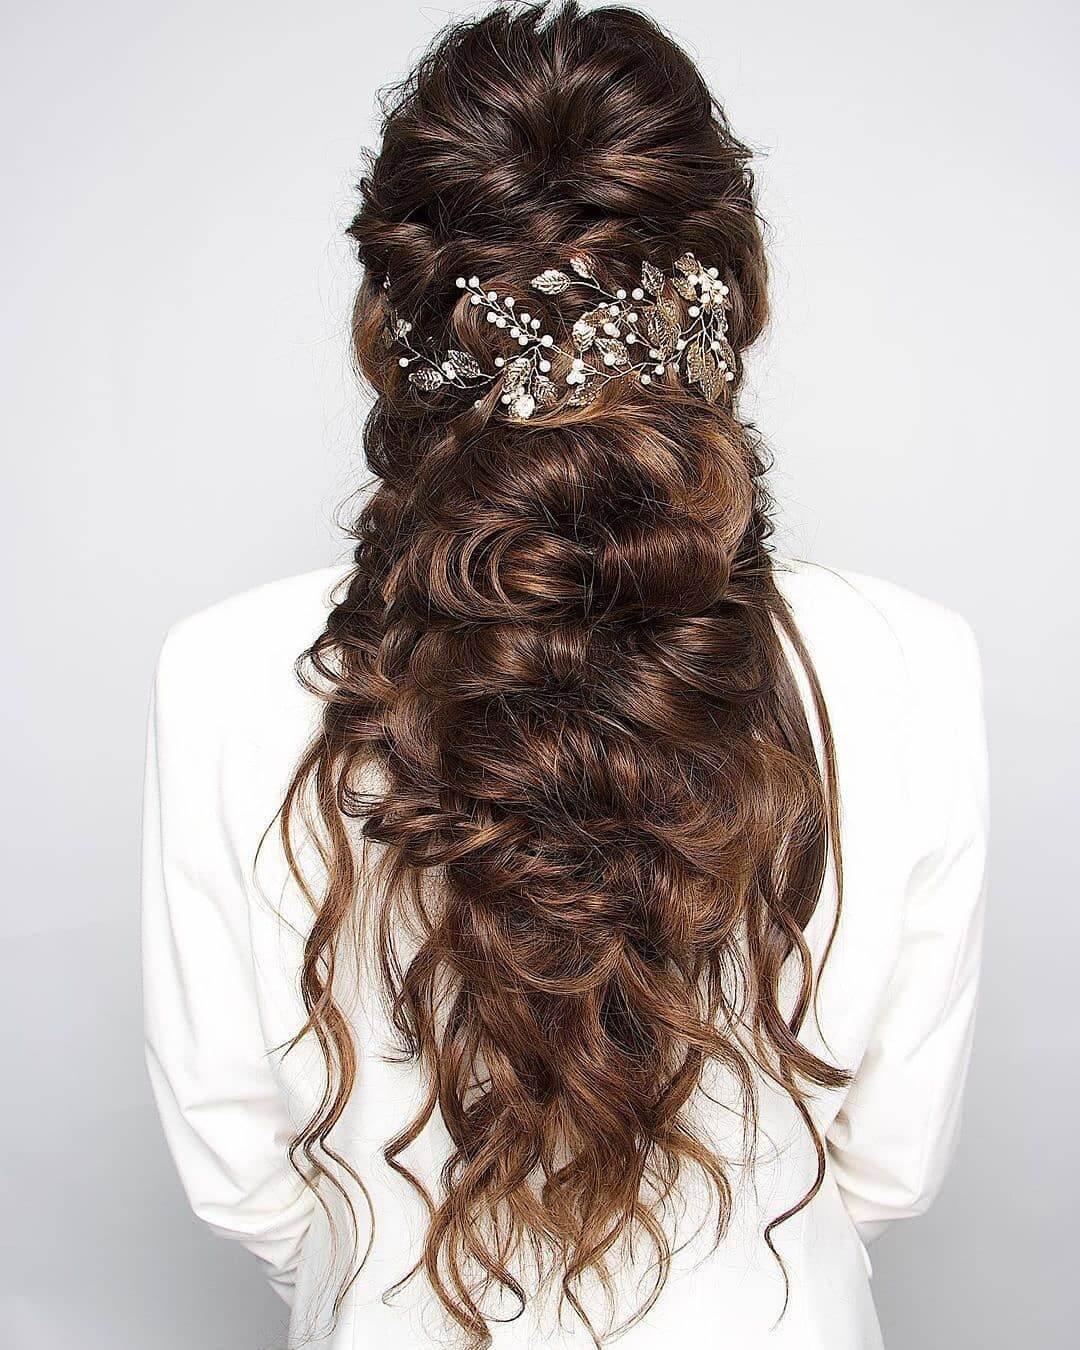 Intricate Hairstyle for Long Hair